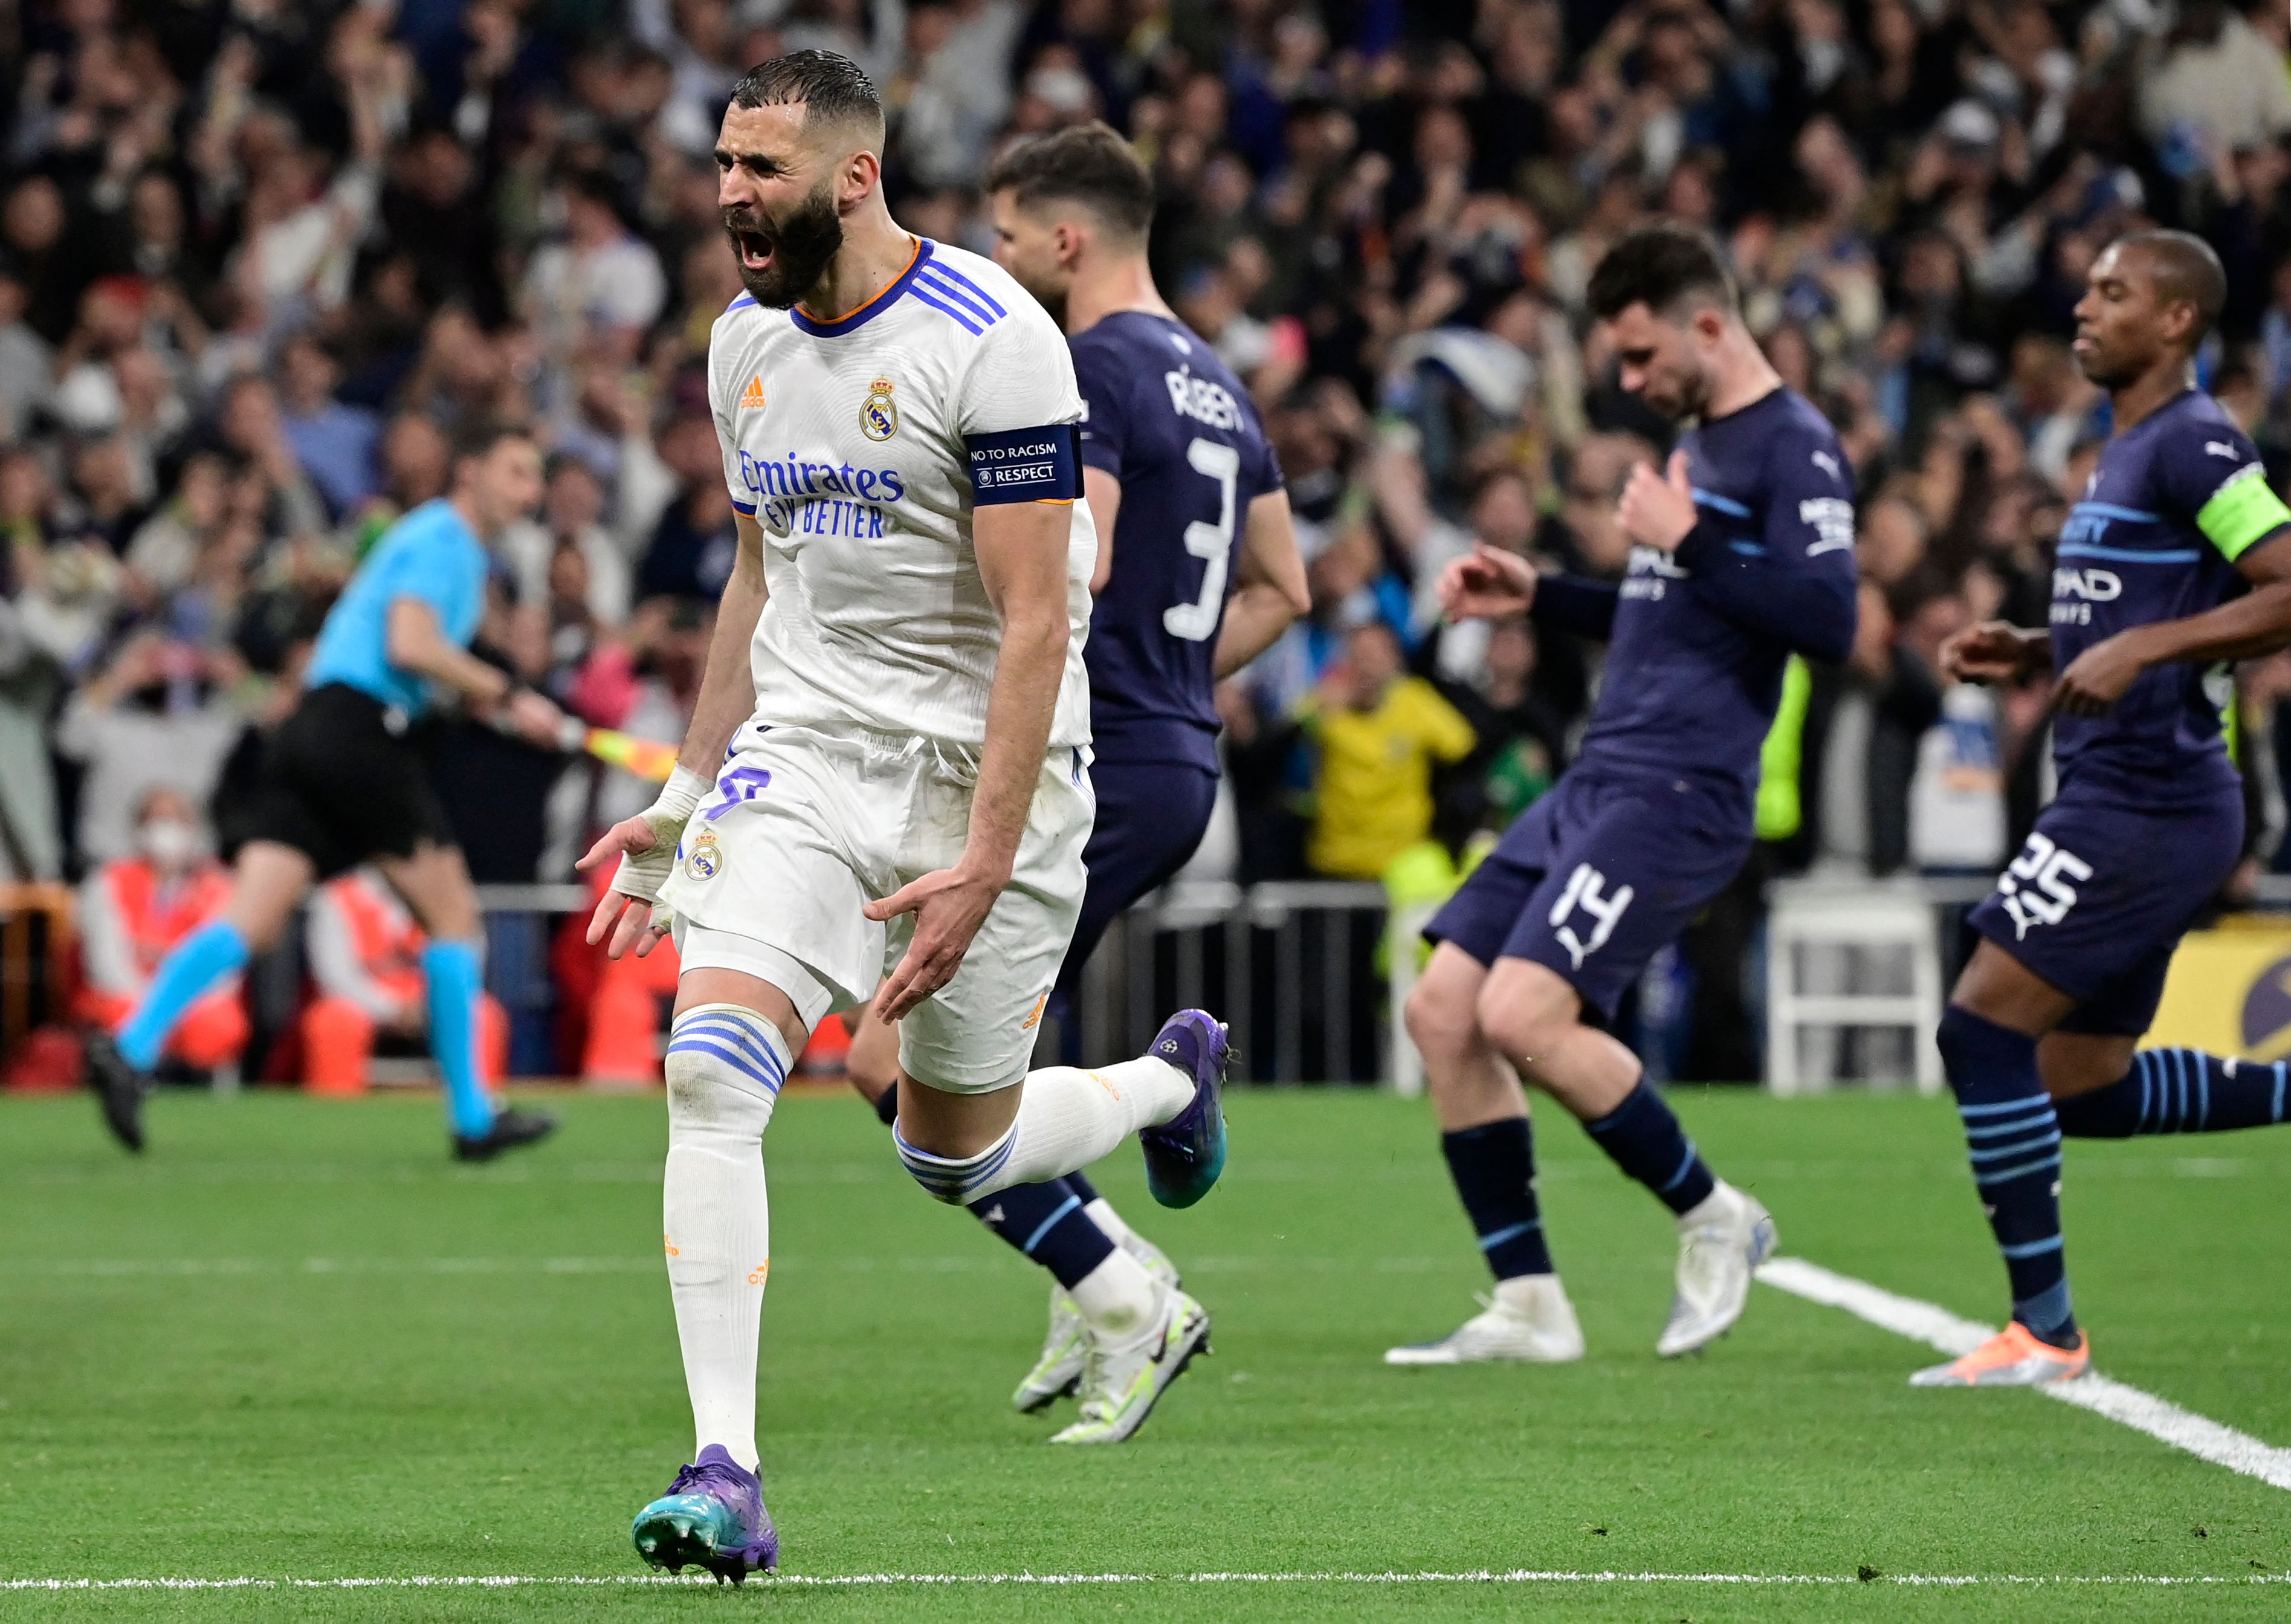 Champions League Semi-Final: COMEBACK KINGS Real Madrid beat Manchester City in EXTRA-TIME to reach UCL FINAL: Man City are ELIMINATED, Real Madrid face Liverpool in Champions League FINAL